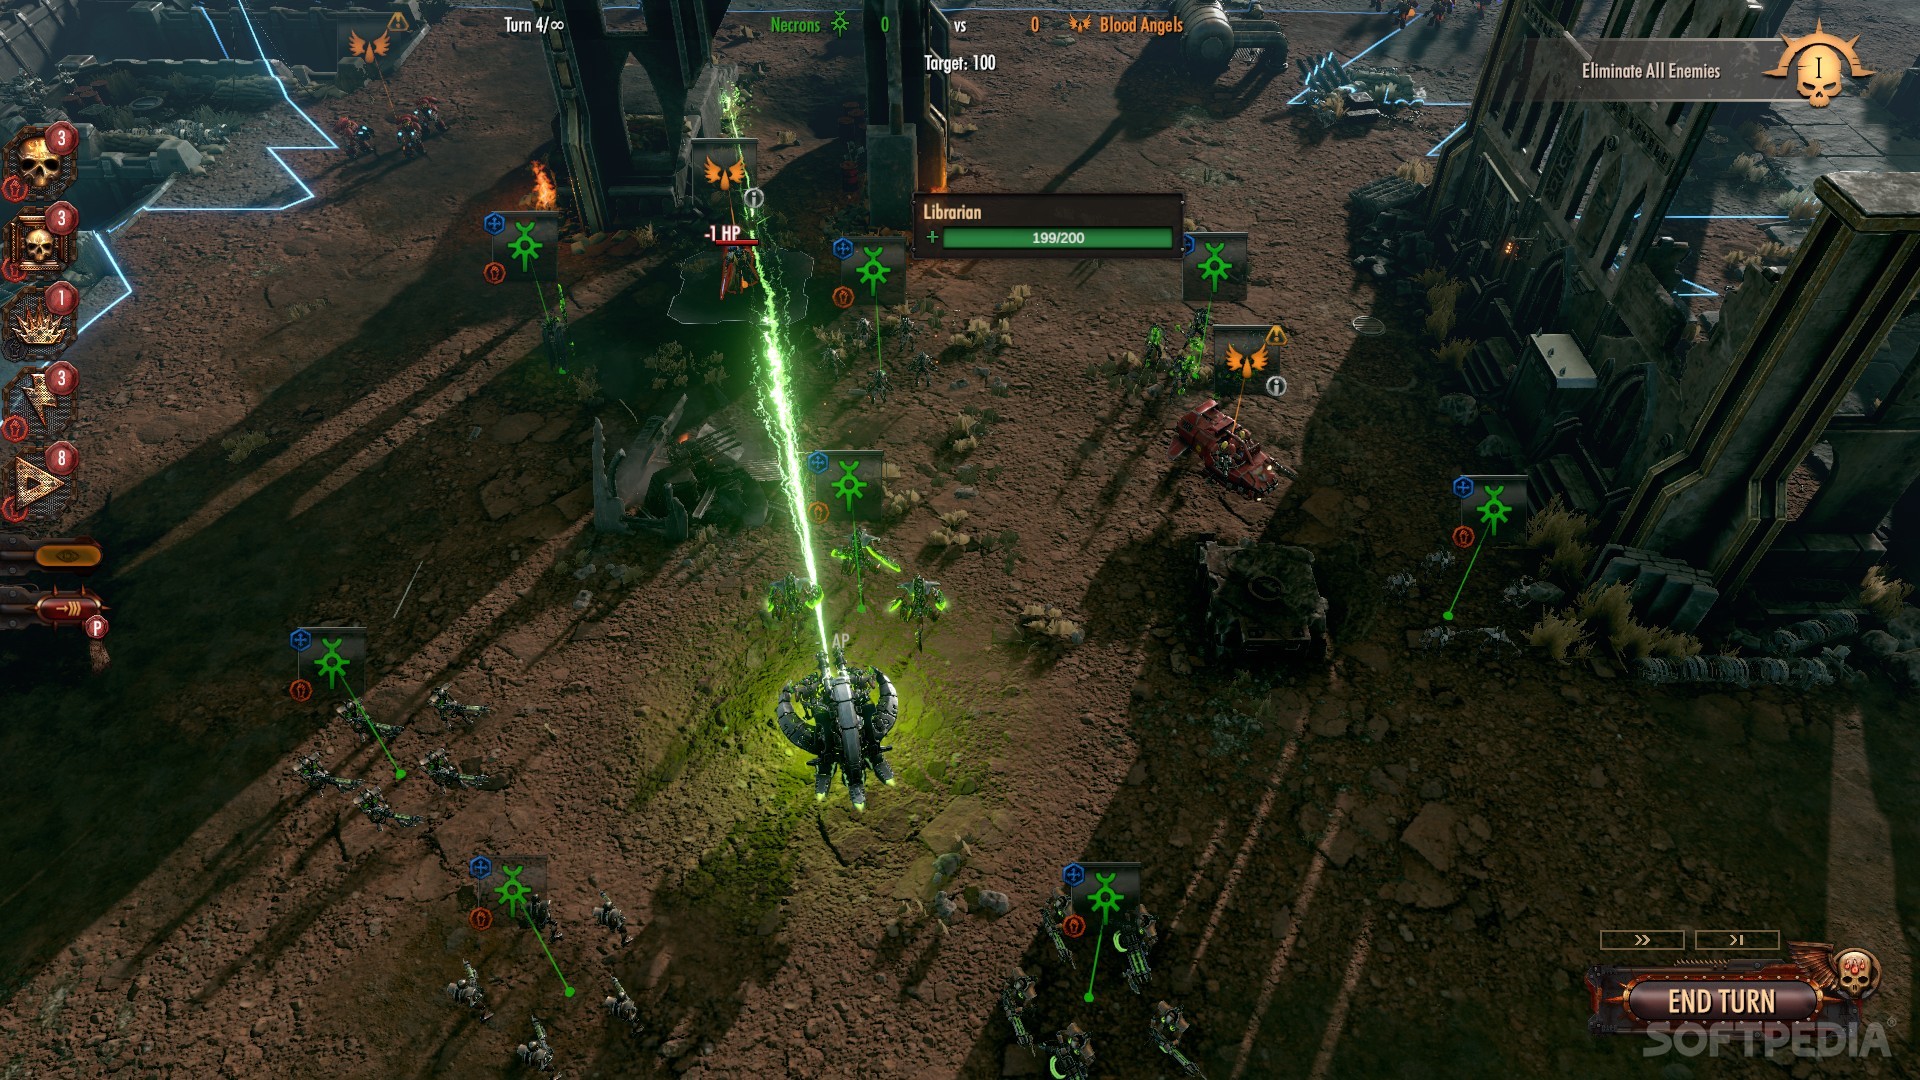 The Necrons are coming to Warhammer 40K strategy game Battlesector